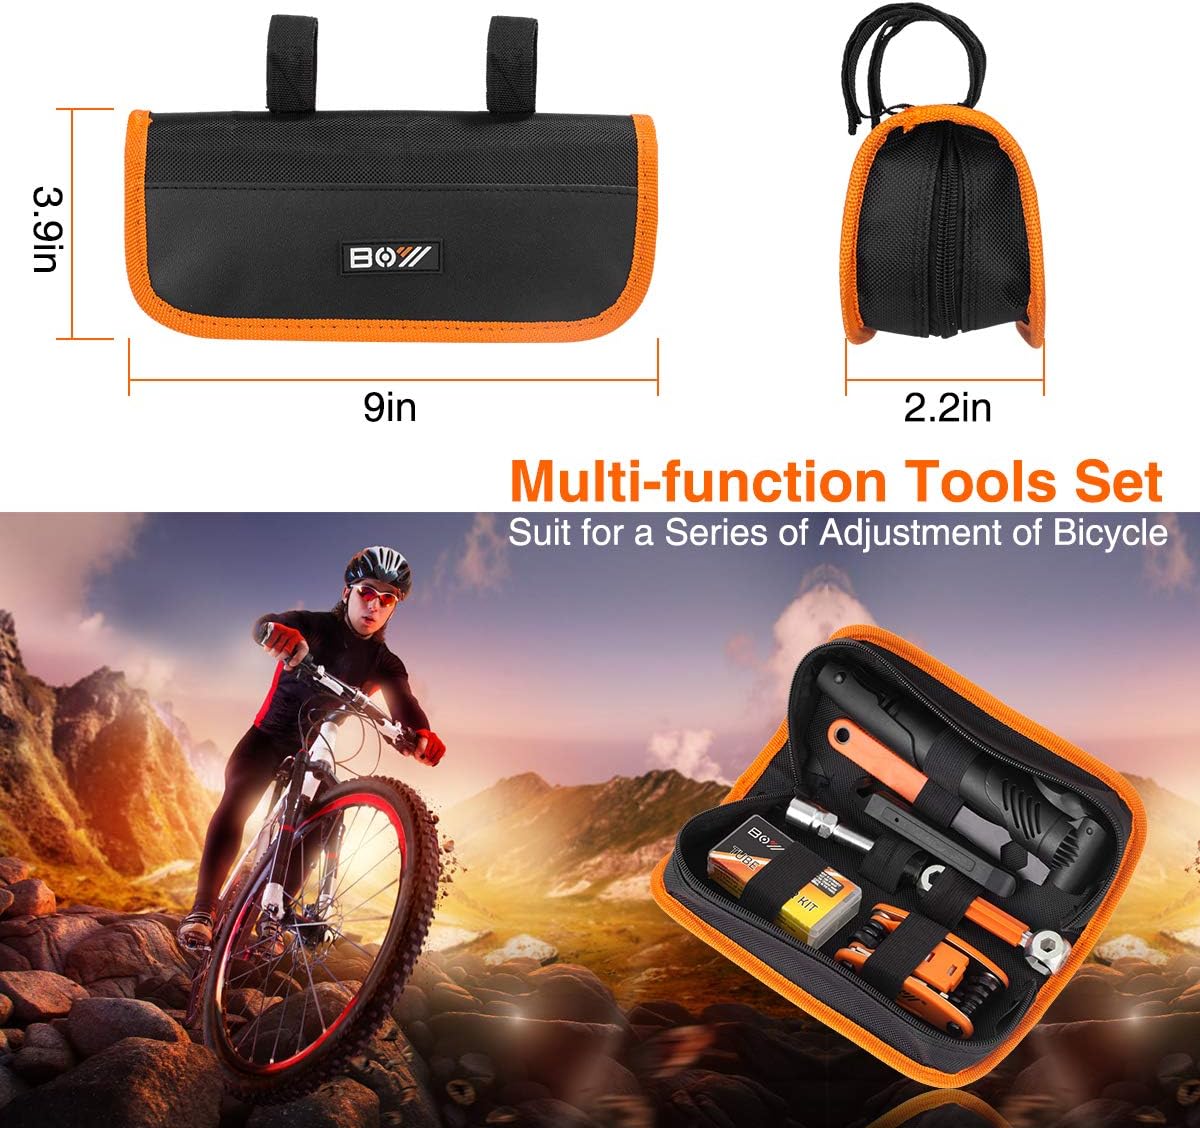 Bicycle Repair Bag  Bicycle Tire Pump, Home Bike Tool Portable Patches Fixes, Inflator, Maintenance for Camping Travel Essentials Tool Bag Bike Repair Tool Kit Safety Emergency All in One Tool